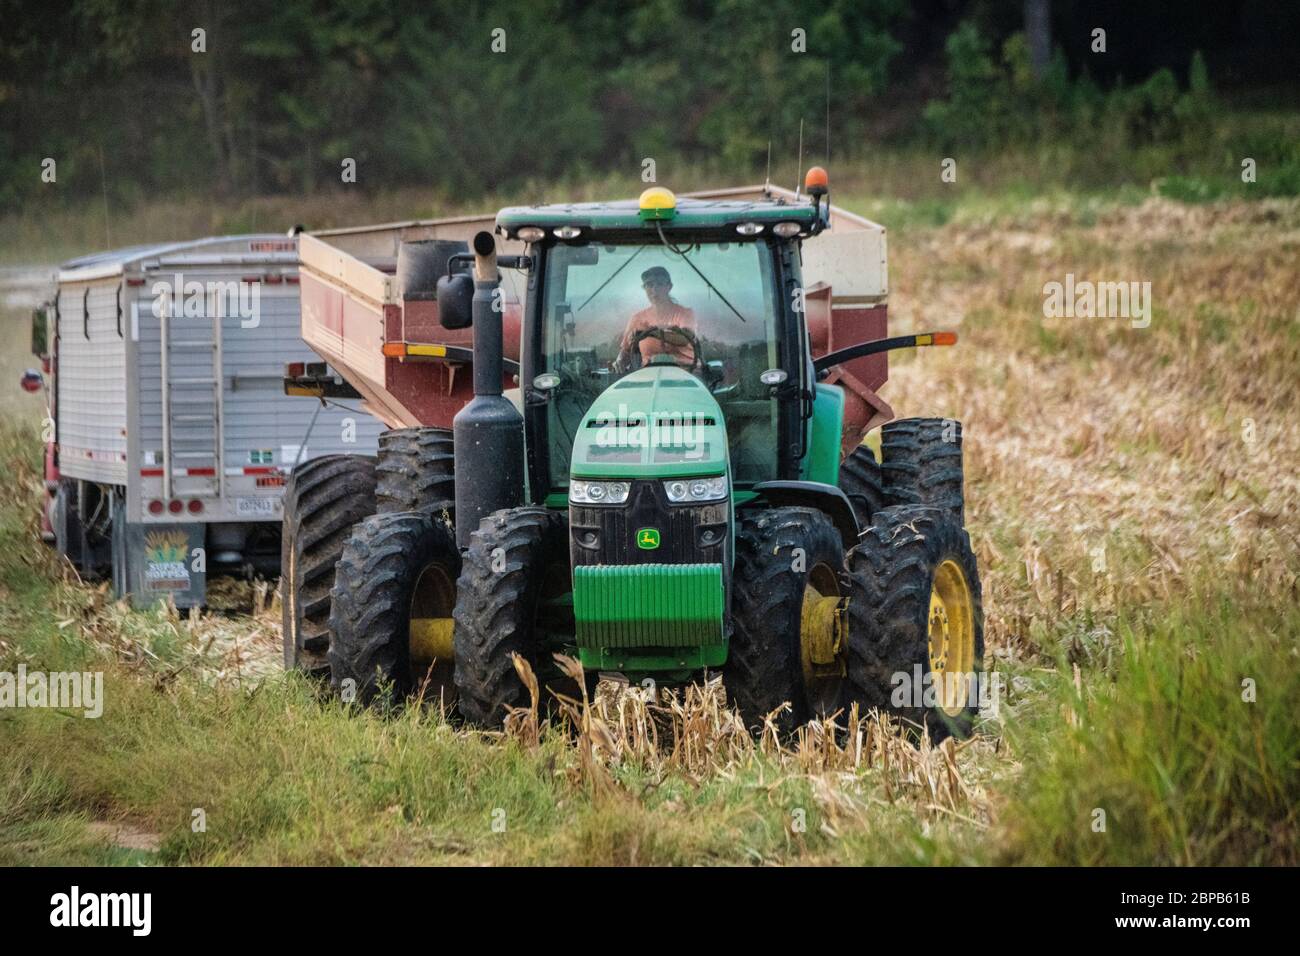 Kim Renfroe-Johnson ween operating a tractor during corn harvest at her family farm September 18, 2019 in Carroll County, Tennessee. The farm utilizes conservation practices developed with the USDA to balance land stewardship and production. Stock Photo